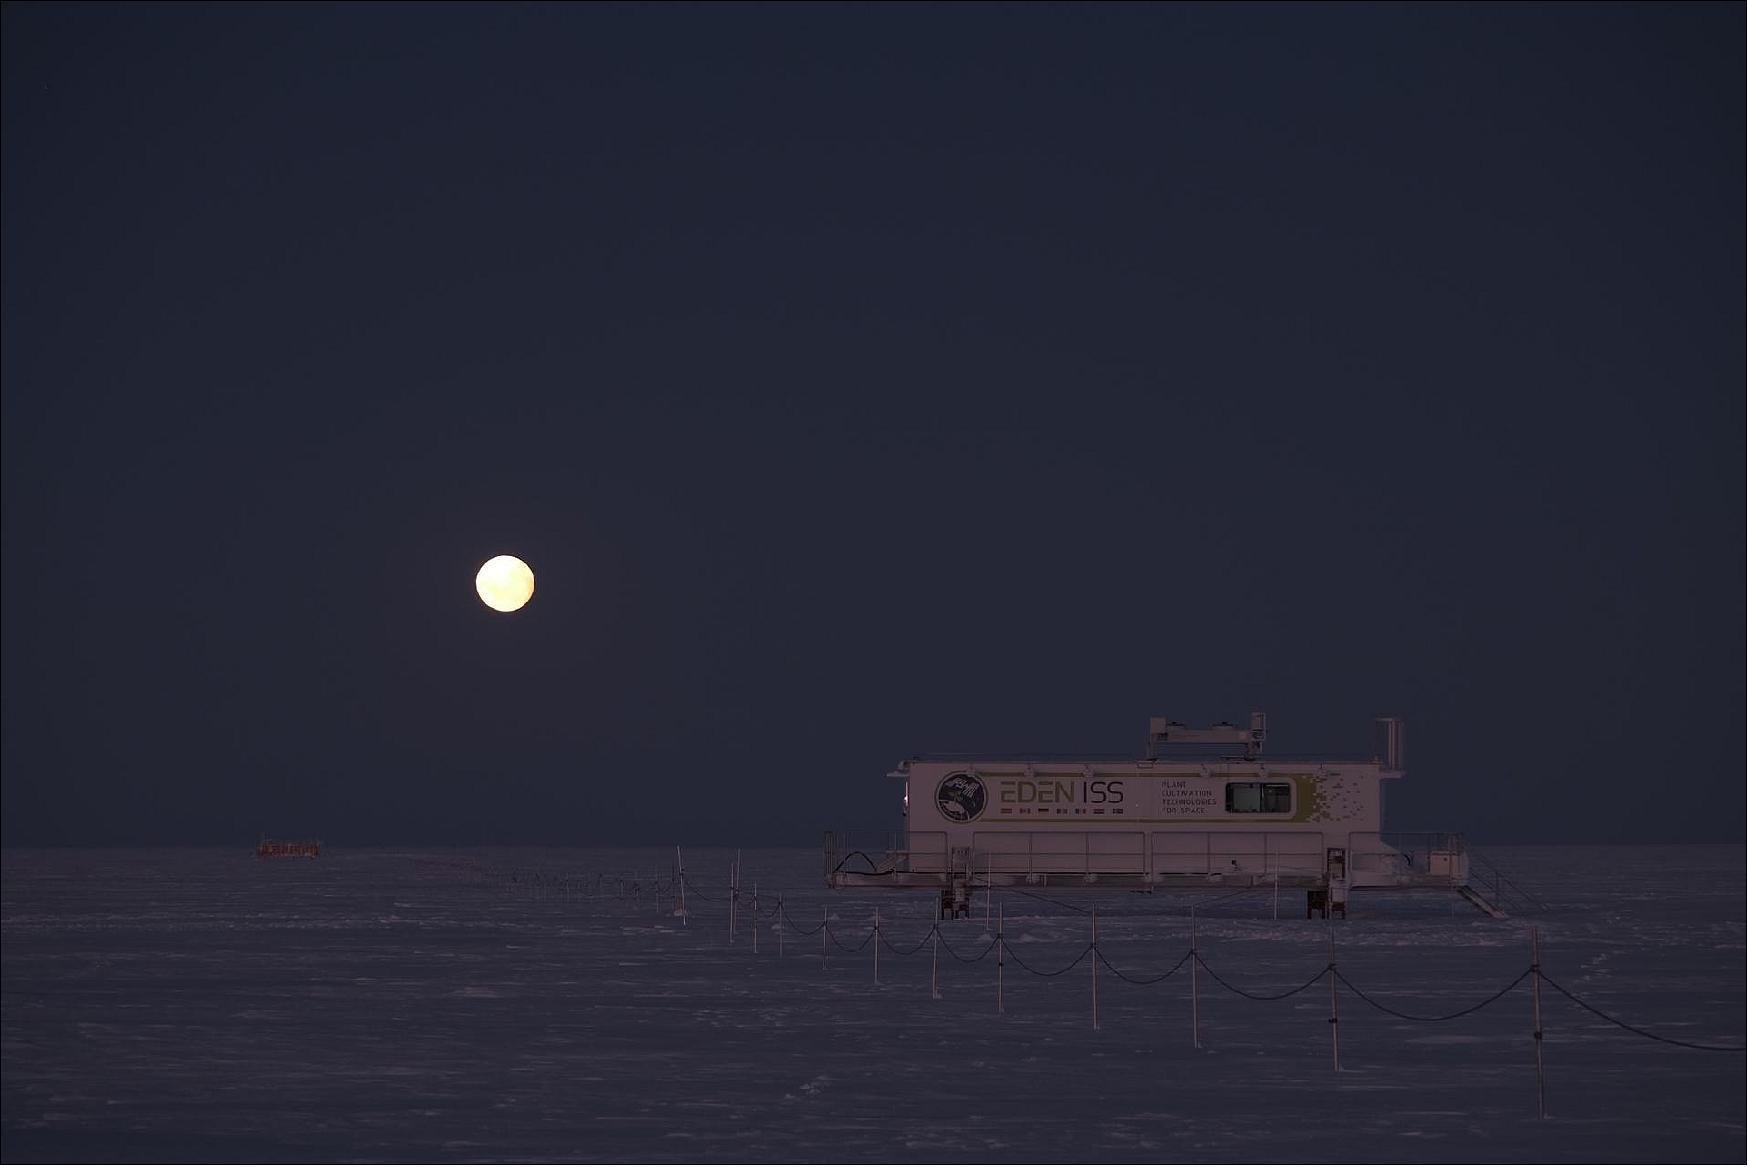 Figure 6: EDEN ISS greenhouse during the polar night [image credit: DLR (CC BY-NC-ND 3.0)]